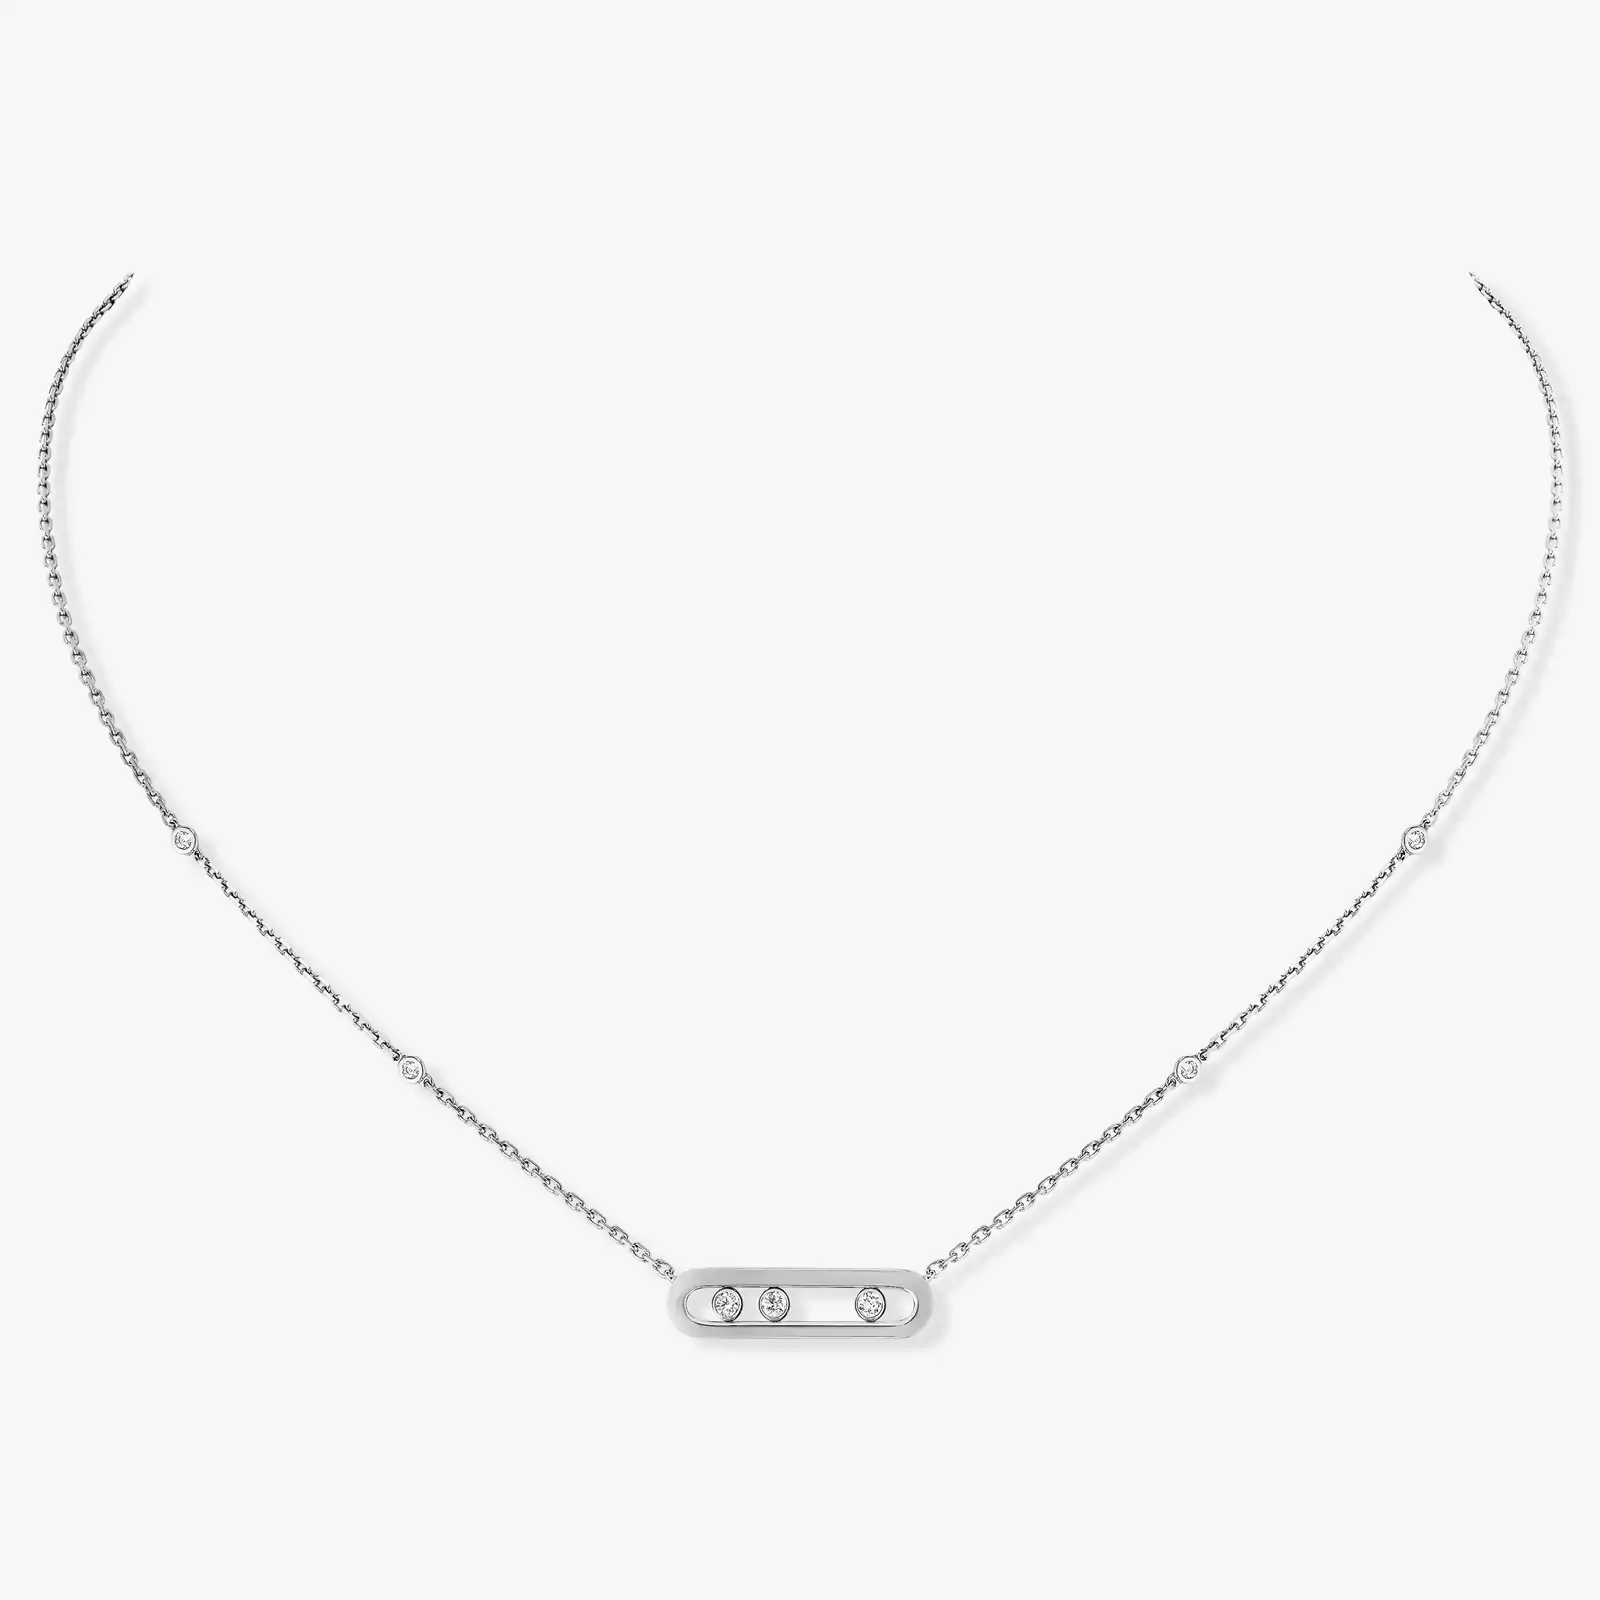 Collier Femme Or Blanc Diamant Baby Move 04323-WG